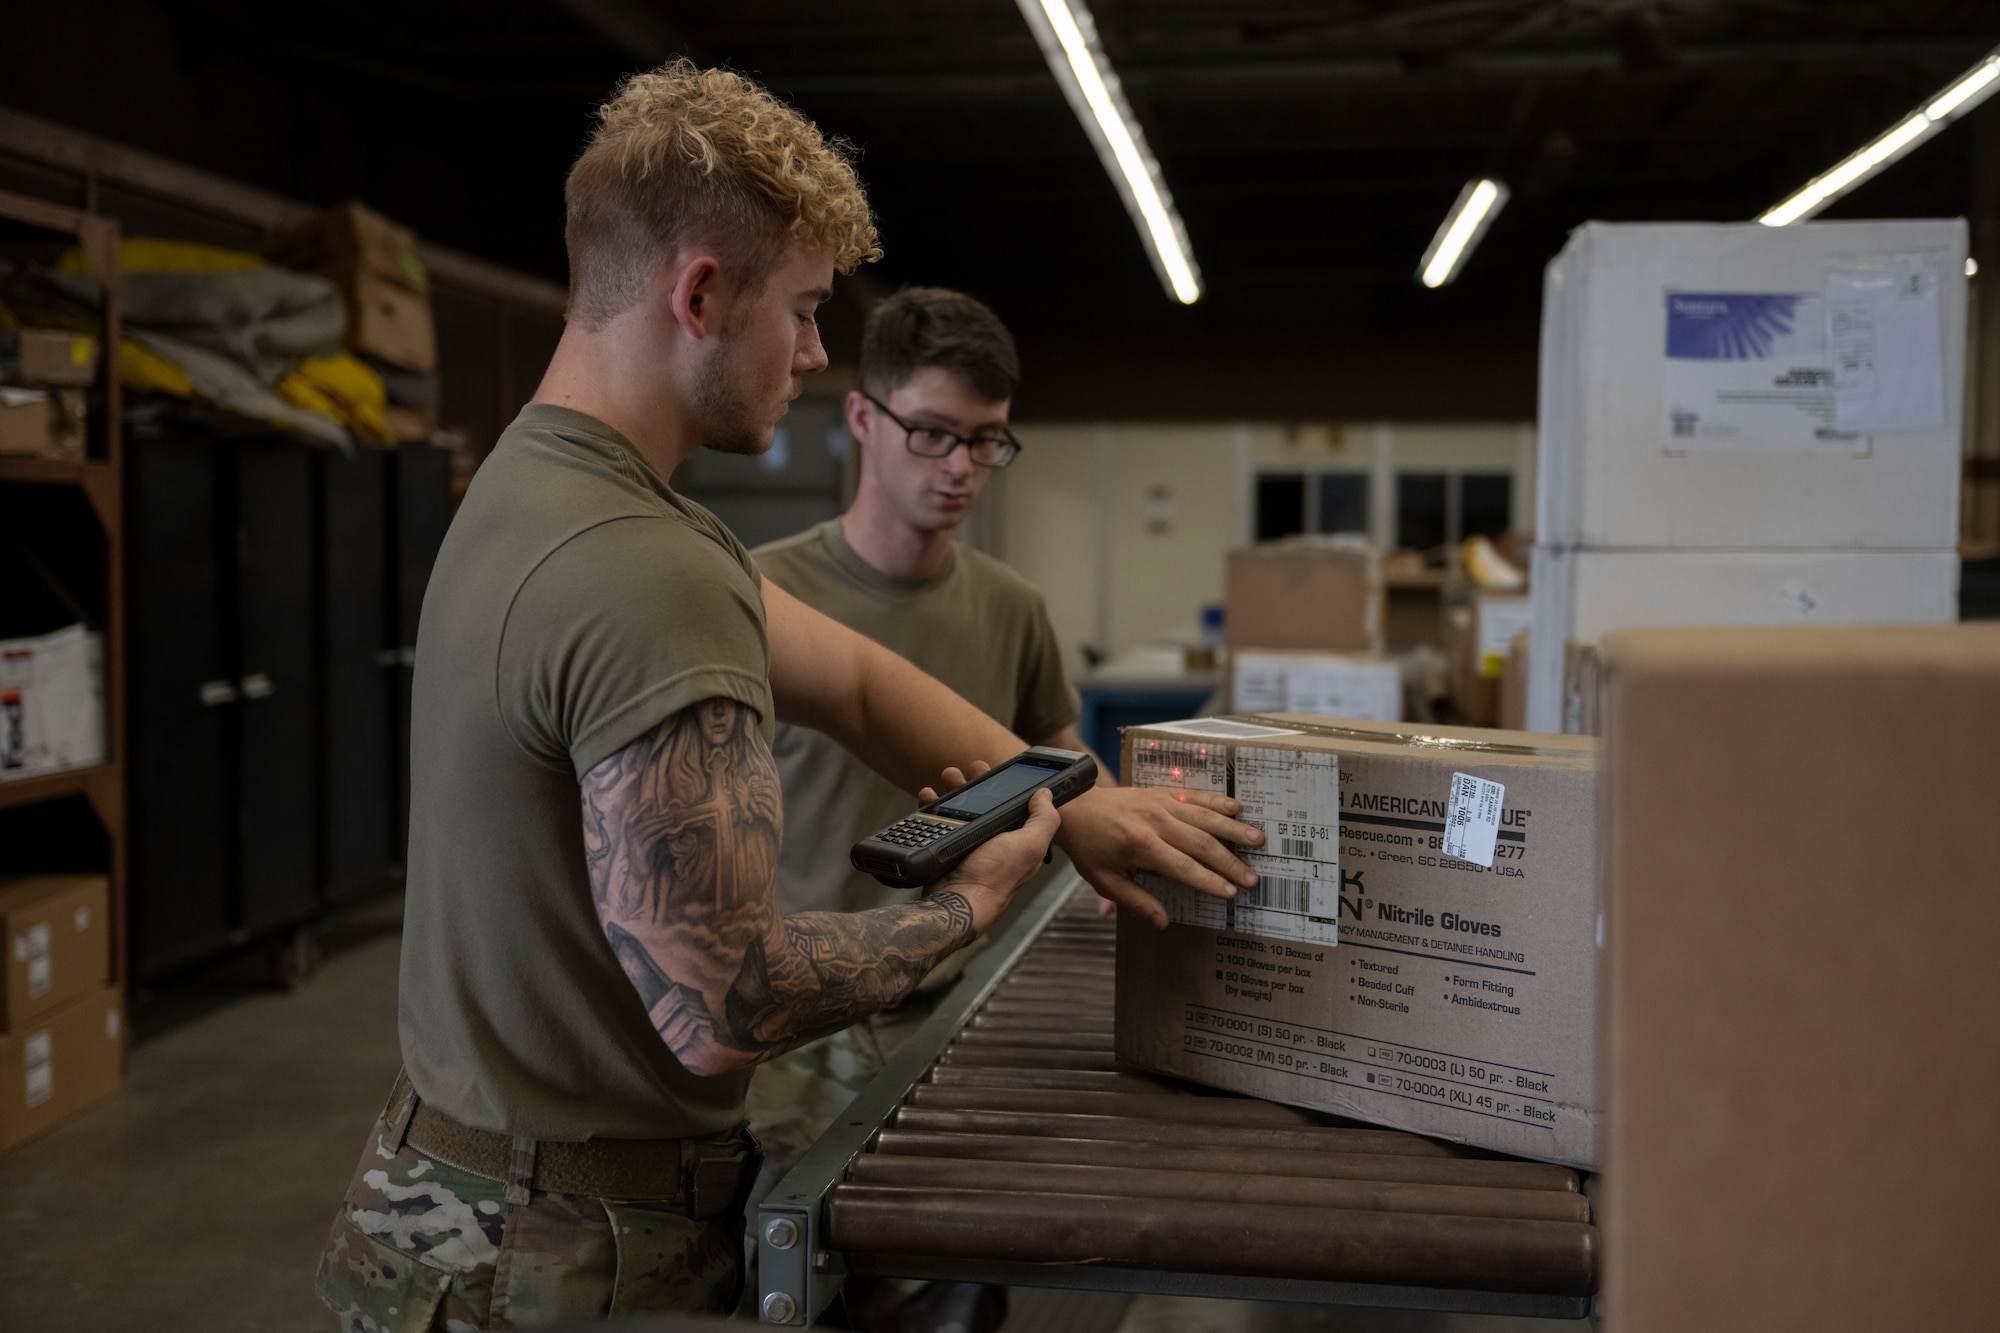 A photo of two people standing in a warehouse with boxes in front of them, scanning a box.